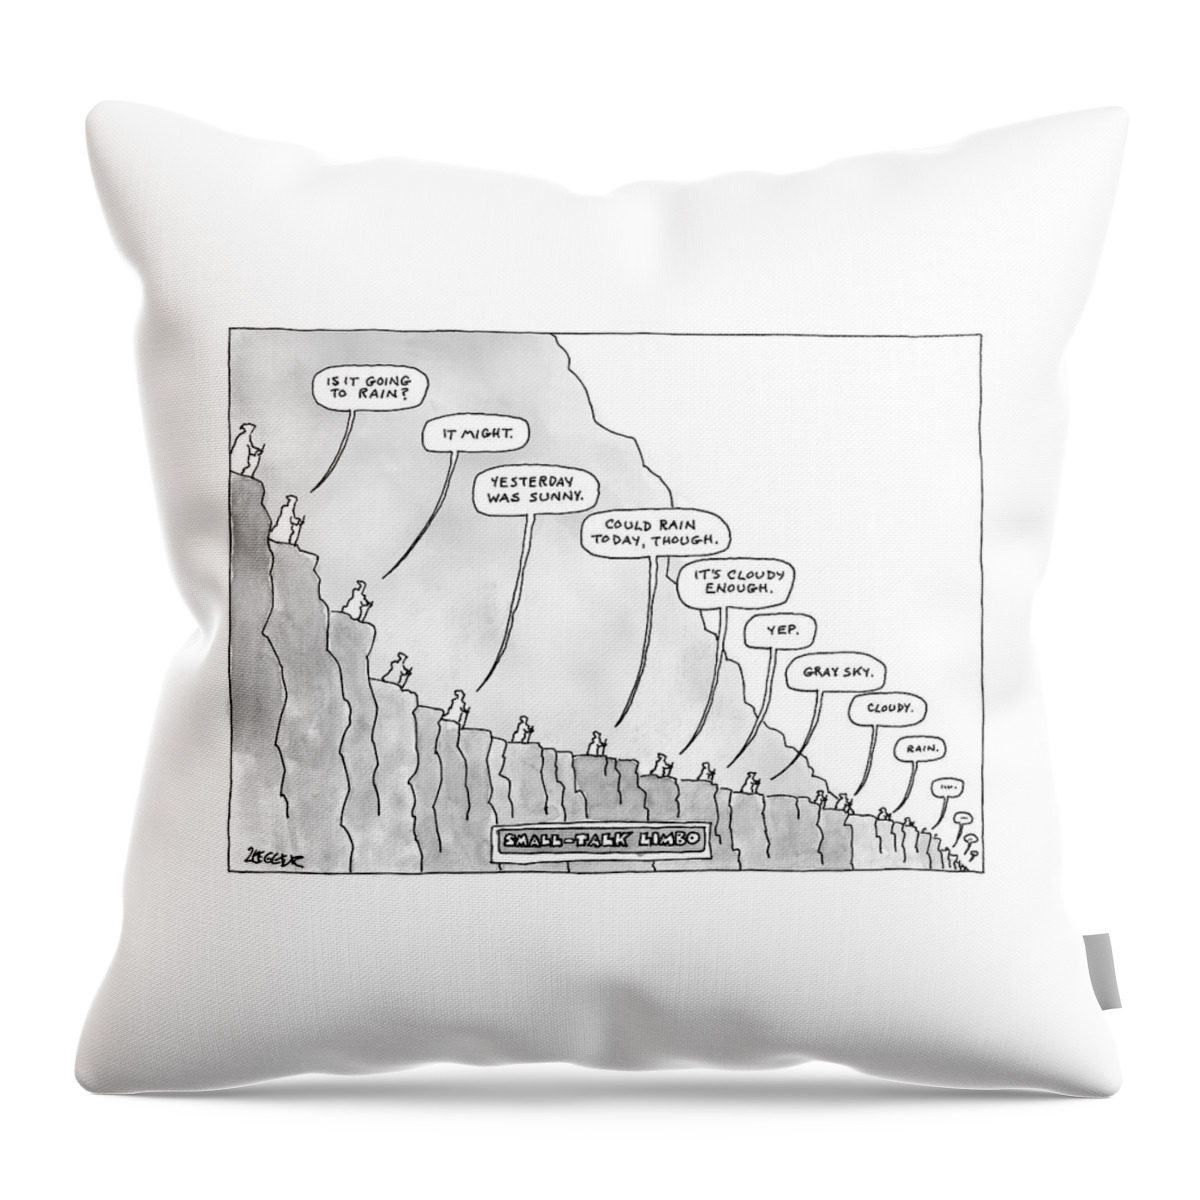 Cloaked Figures Making Their Way Across A Narrow Throw Pillow